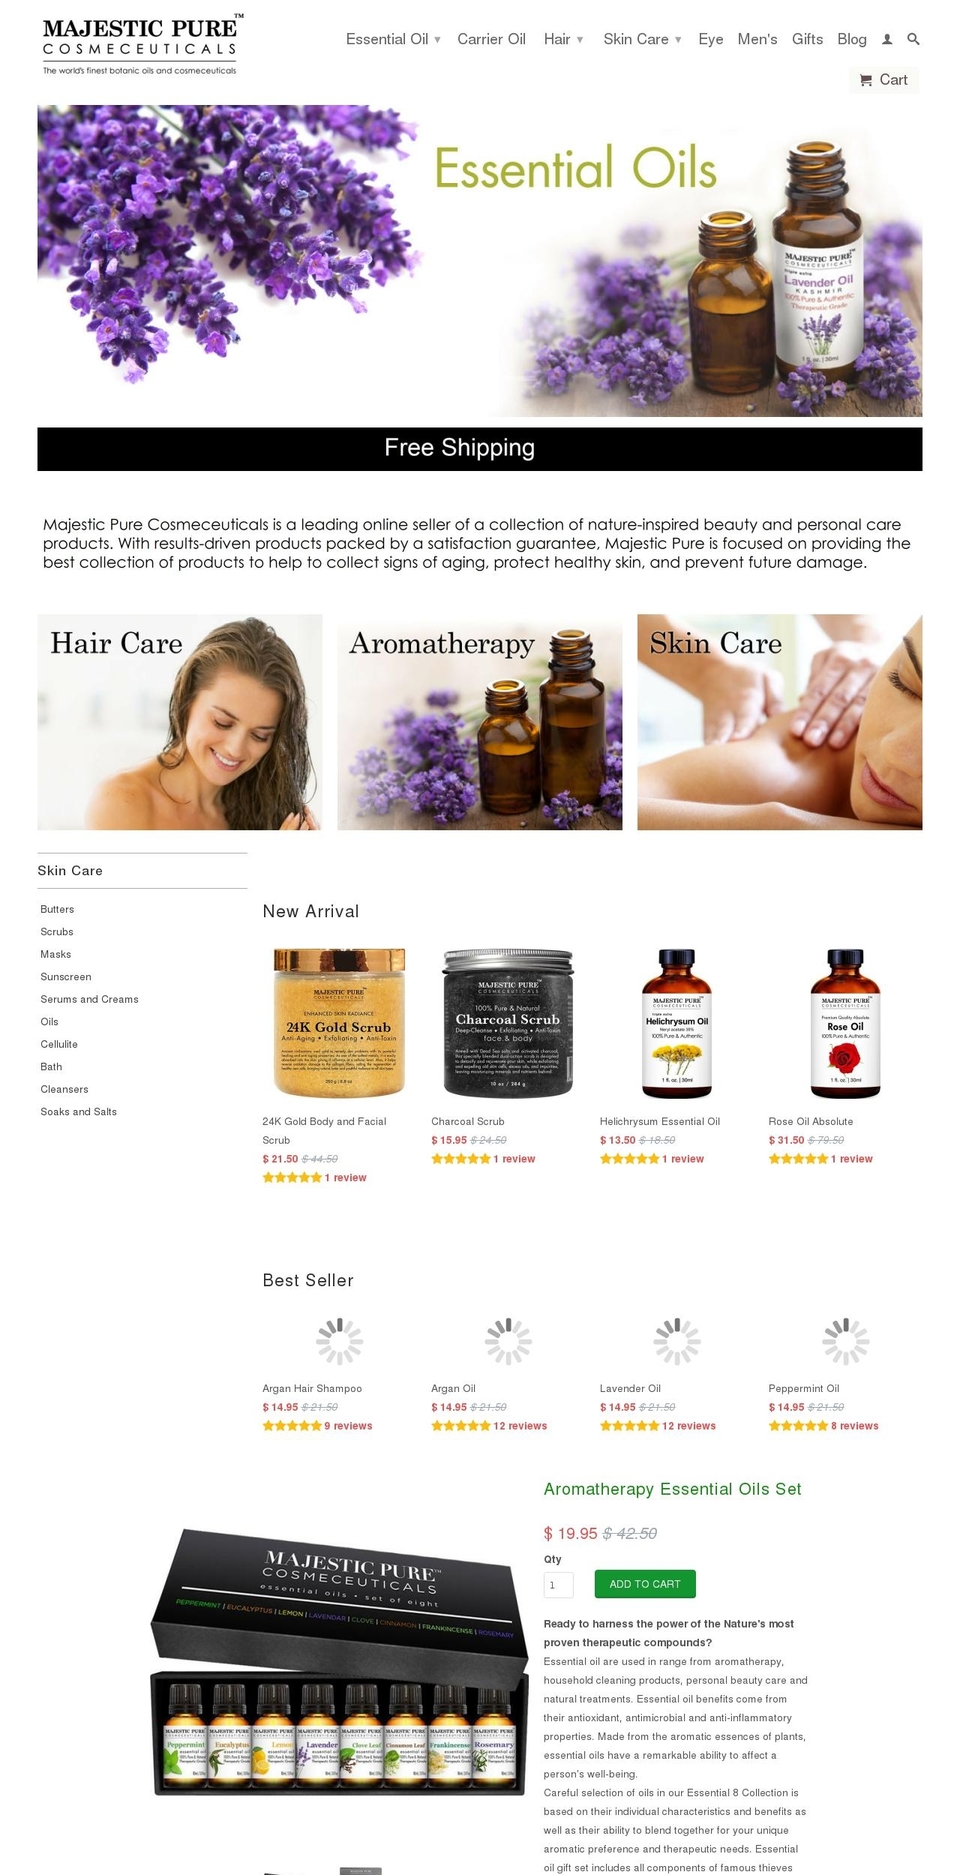 mb_majesticpure_newmaster unlinked Shopify theme site example majesticpure.com